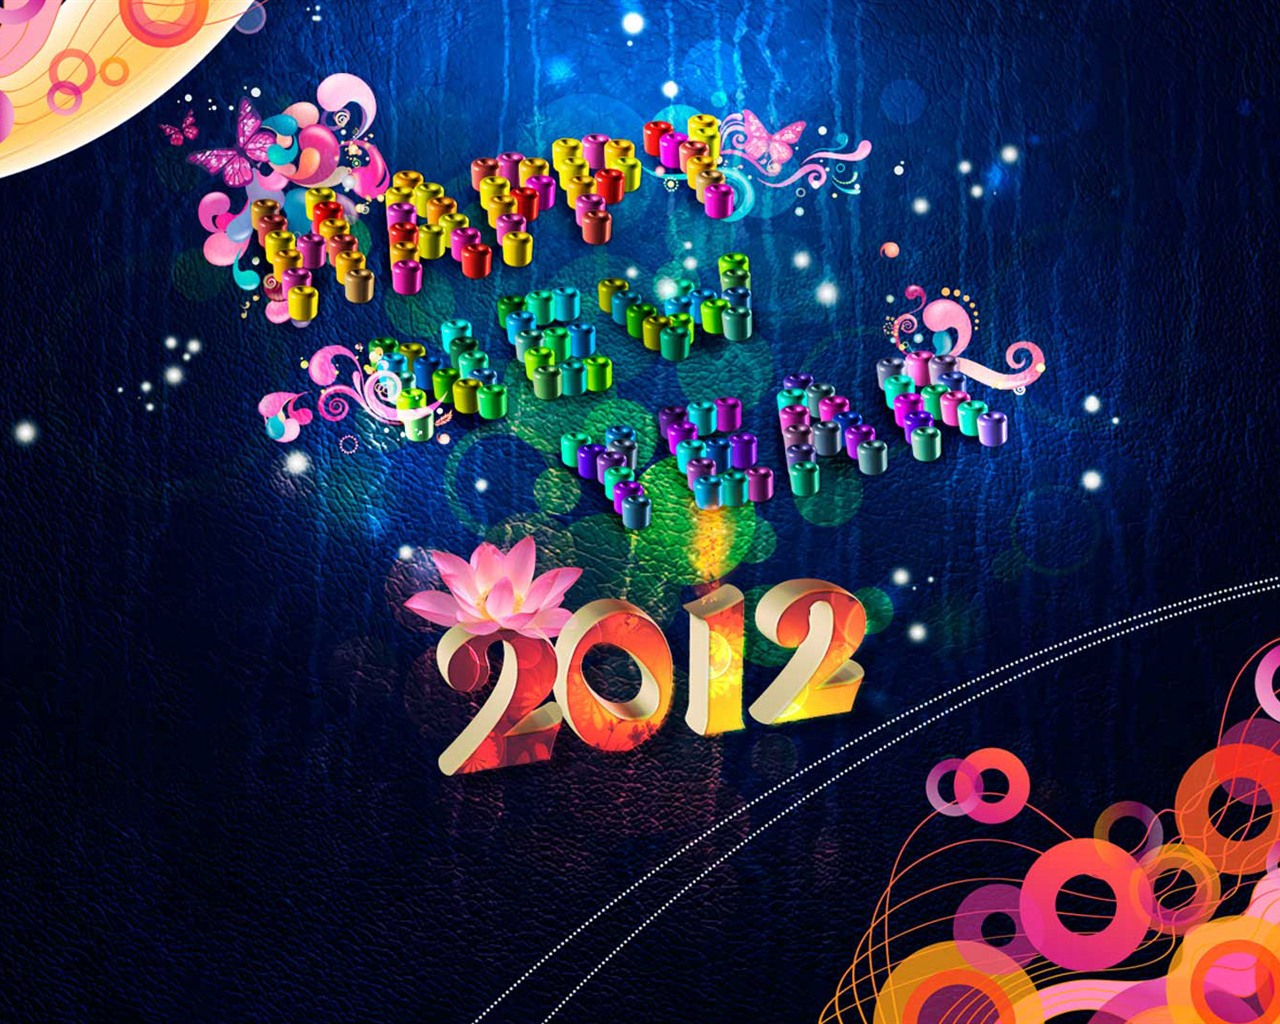 2012 New Year wallpapers (2) #3 - 1280x1024